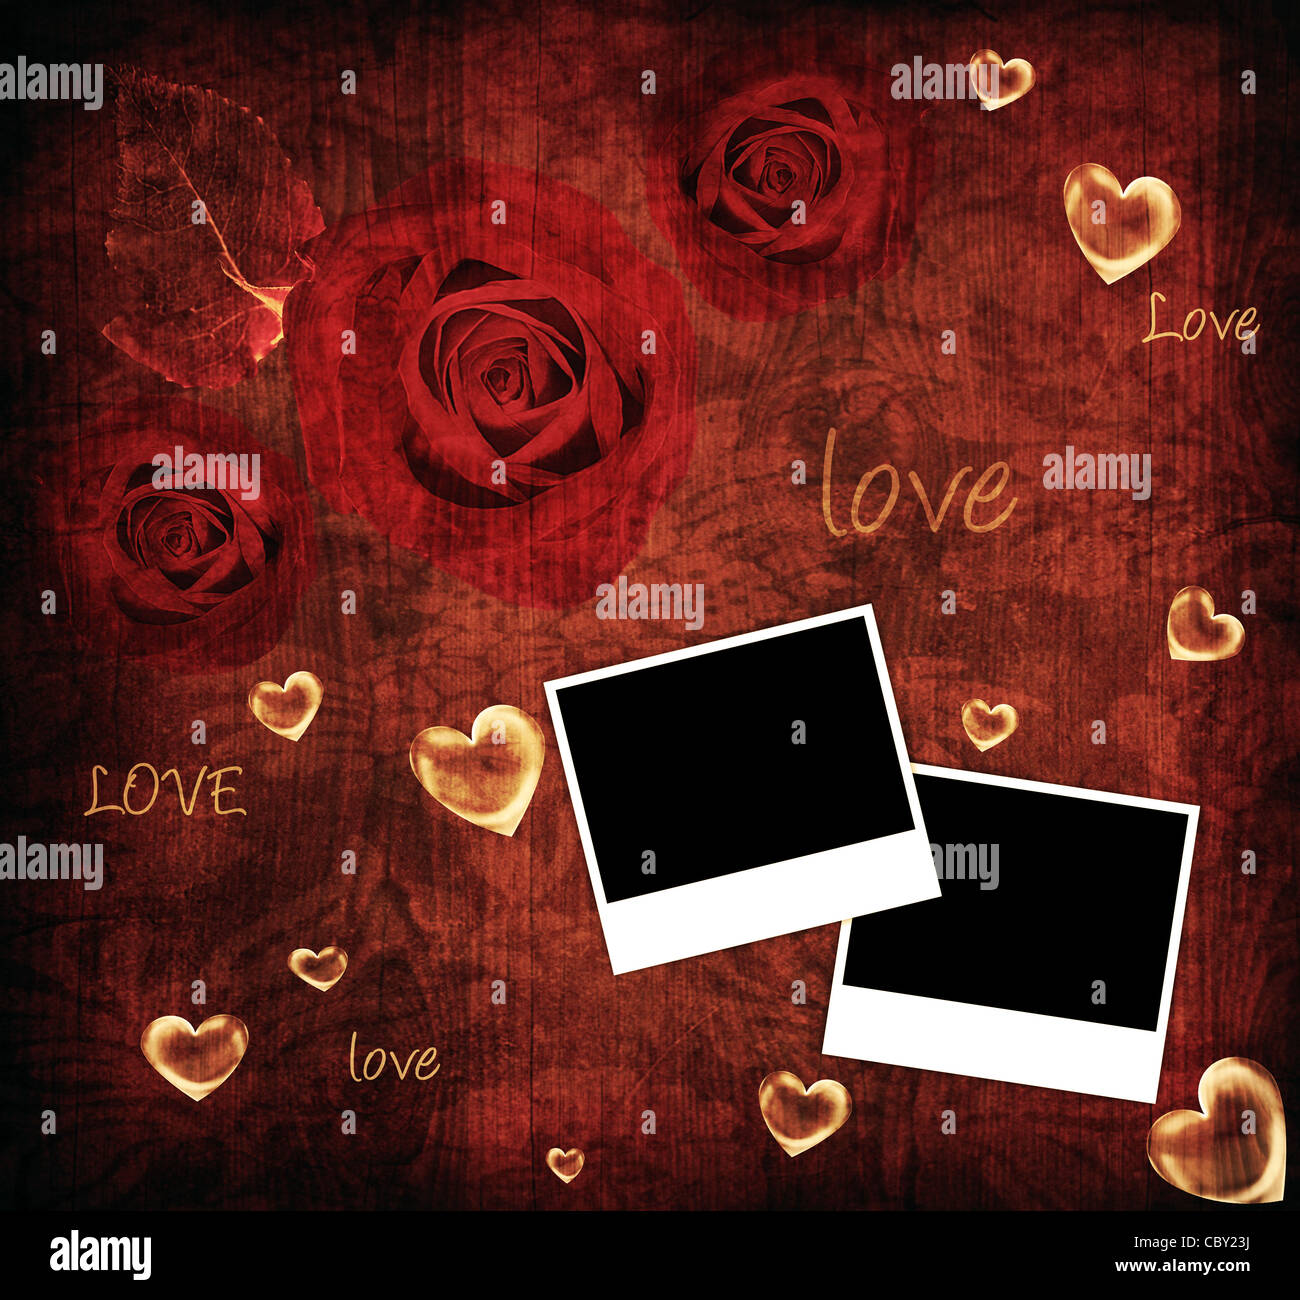 Red roses Valentine card, holiday background with photo frames, hearts & love text Stock Photo